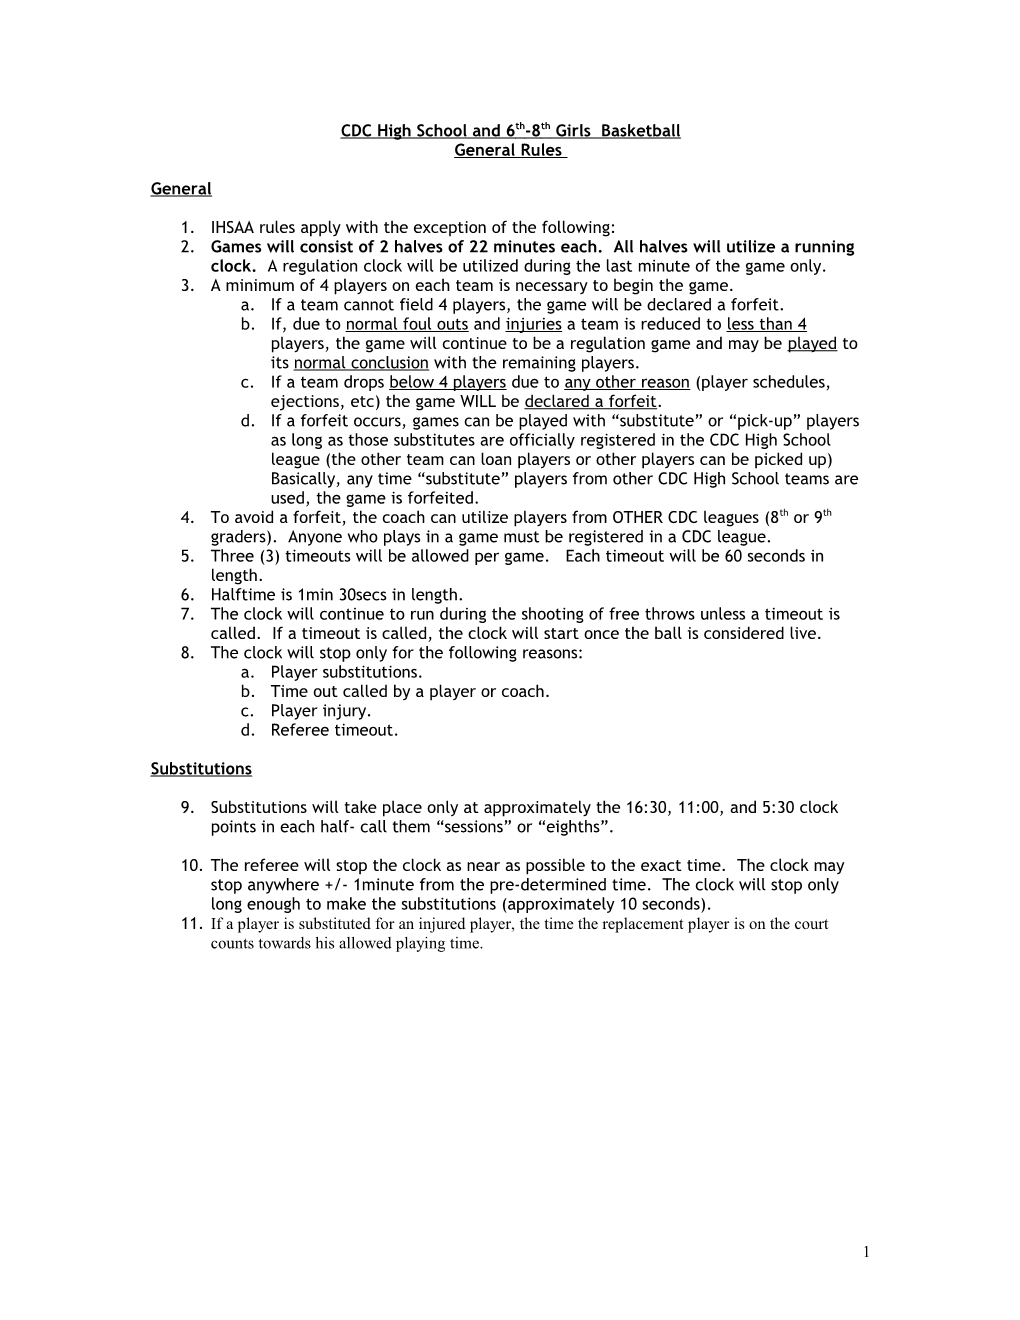 General Basketball Rules for 2002-2003